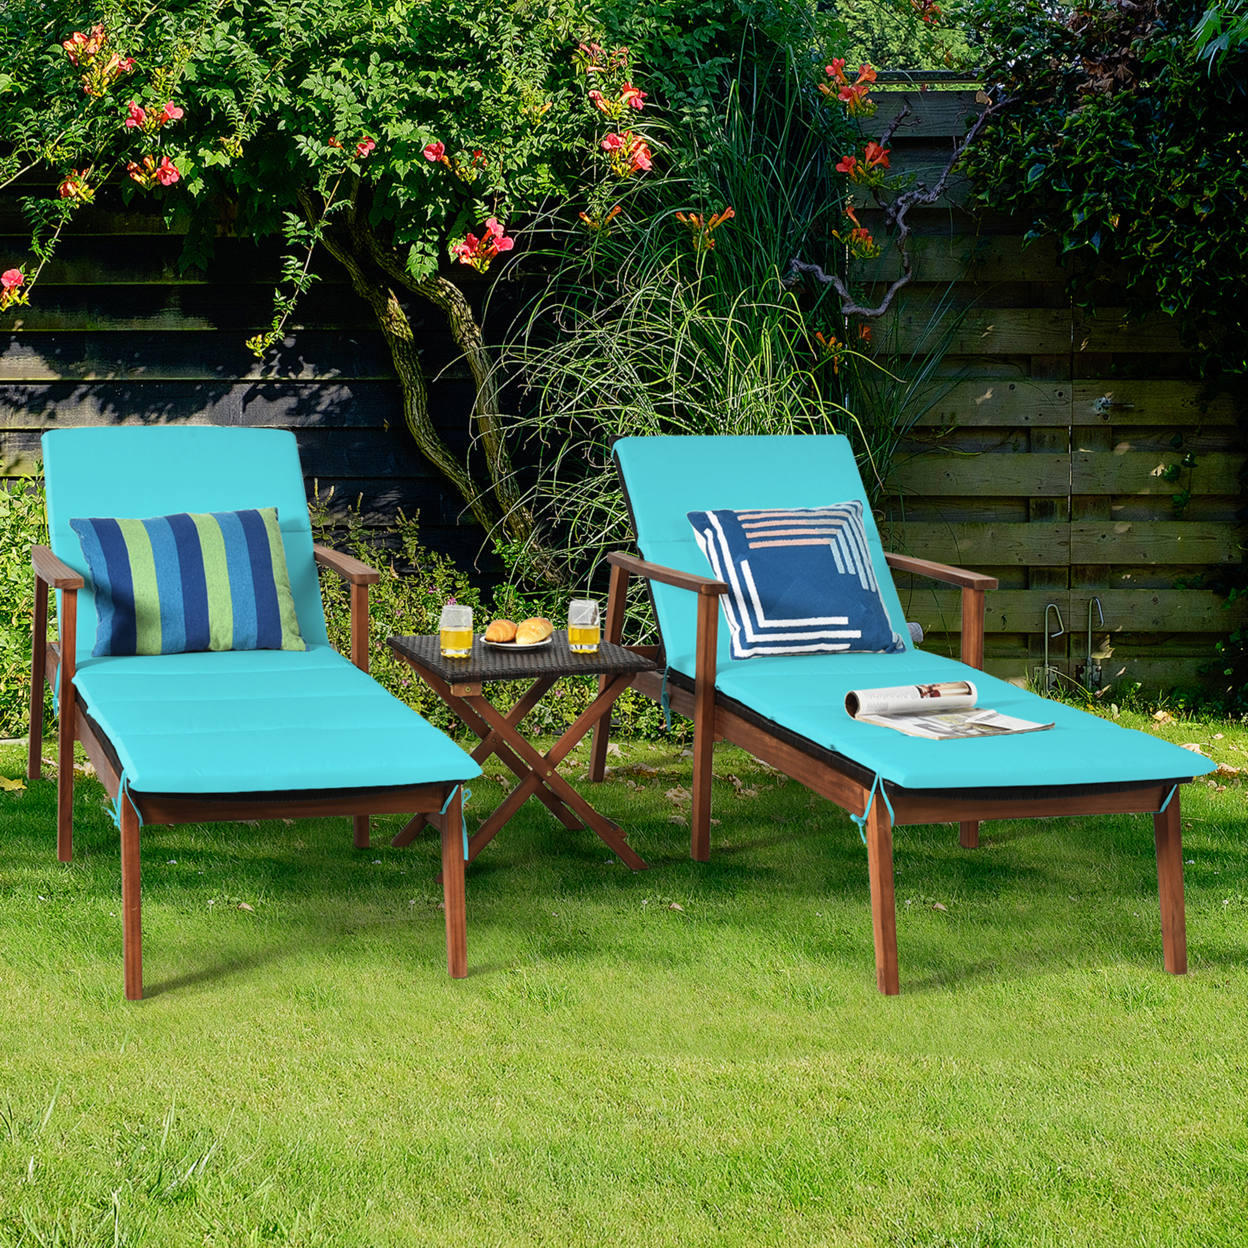 3PCS Outdoor Patio Lounge Chair Set W/ Folding Table Turquoise Cushion